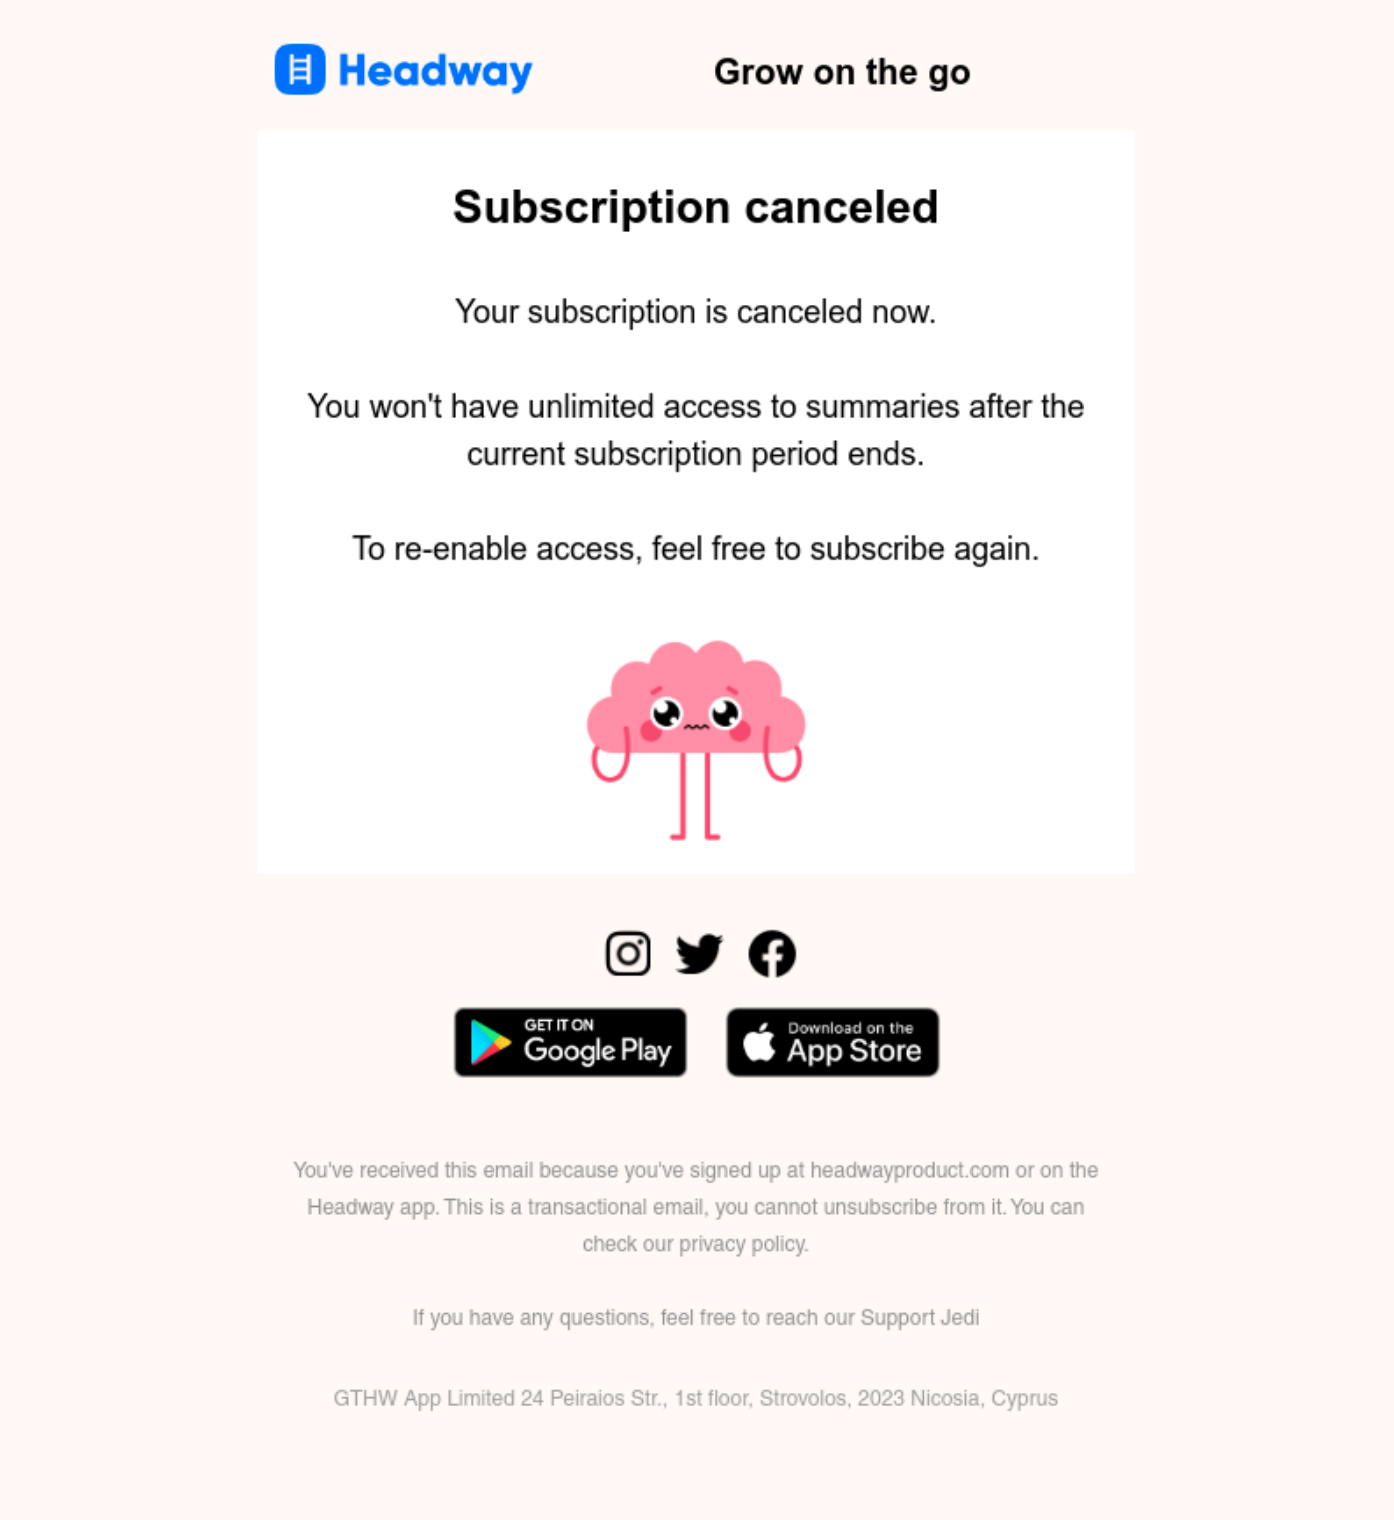 SaaS Cancellation Emails: Screenshot of Headway's cancellation email